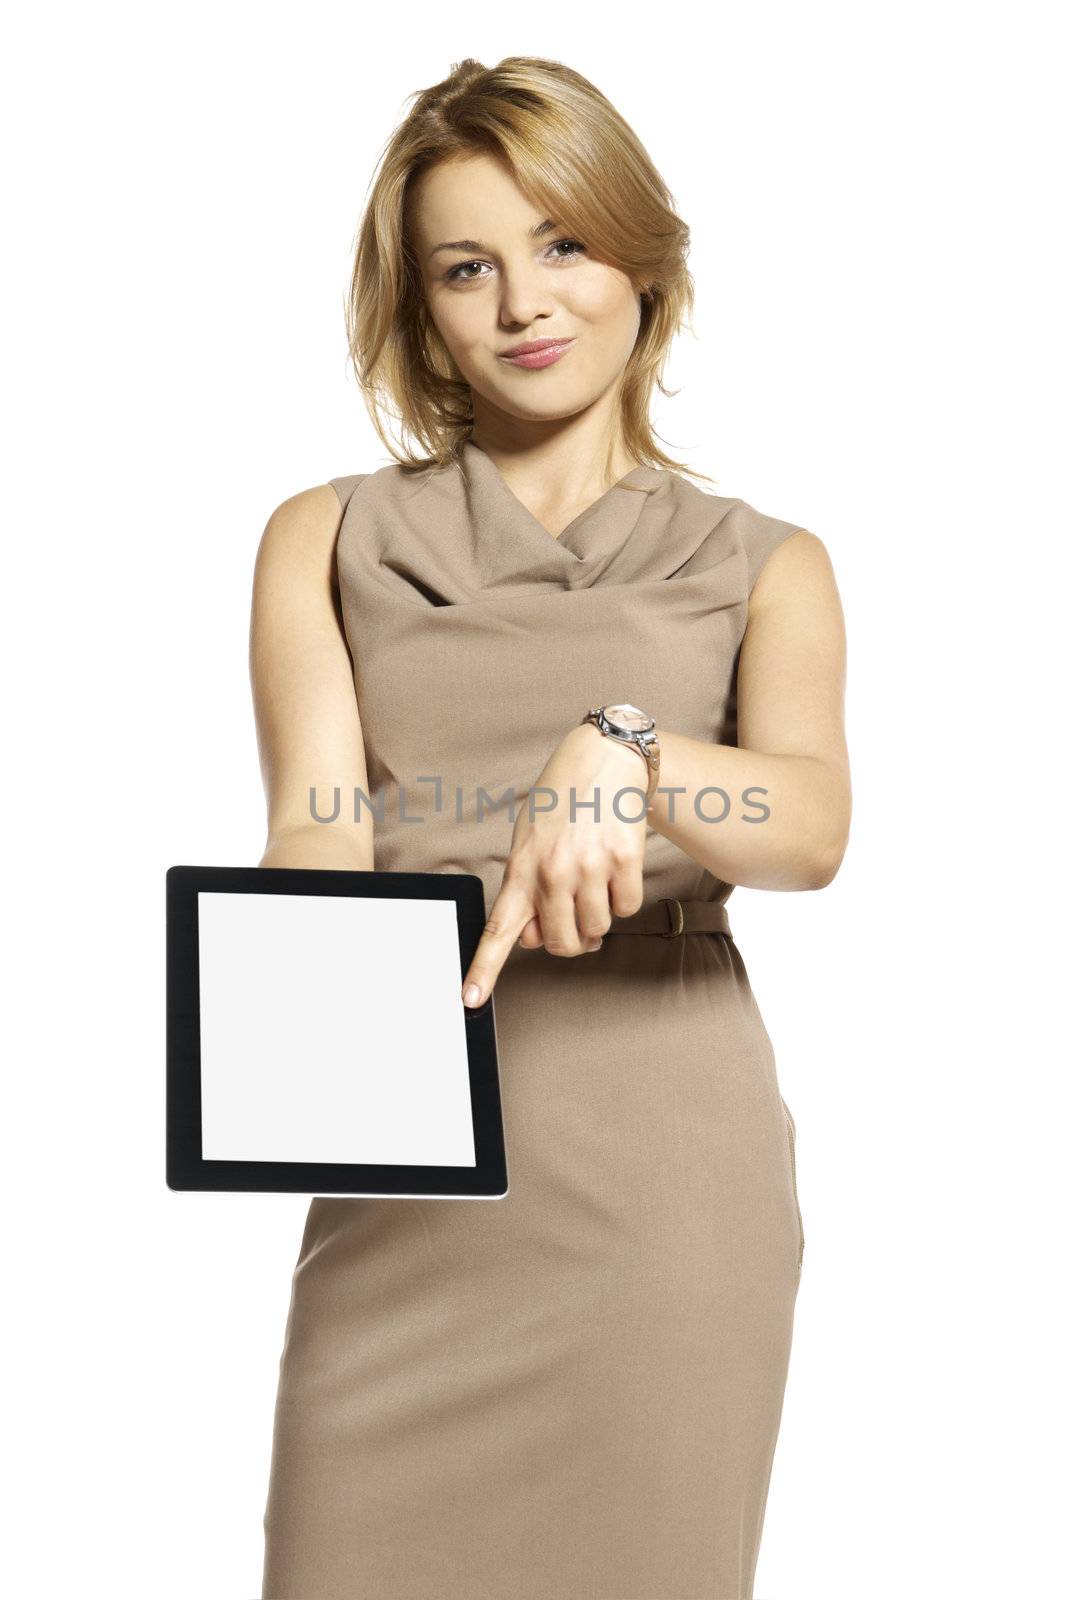 Attractive young woman showing something on digital tablet.